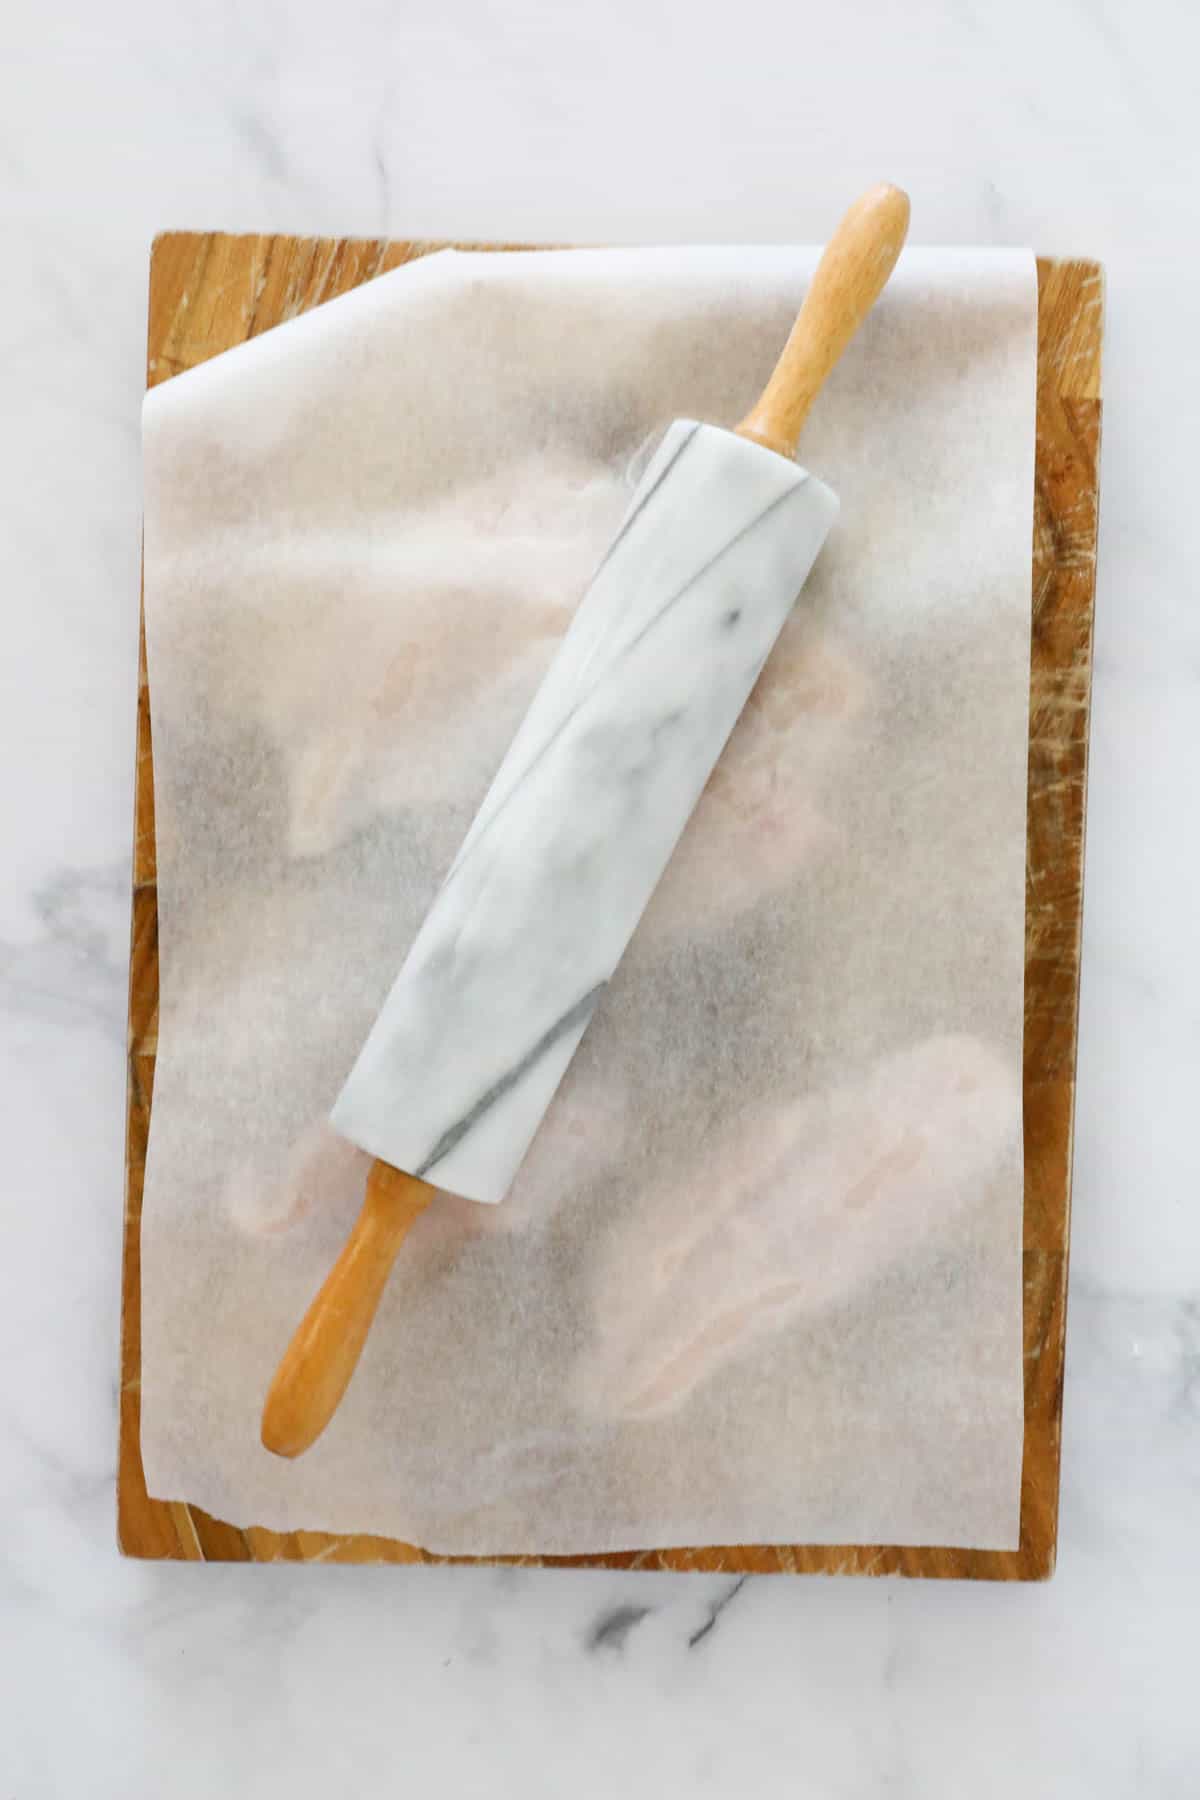 A rolling pin placed on top of baking paper covering fillets on a cutting board.